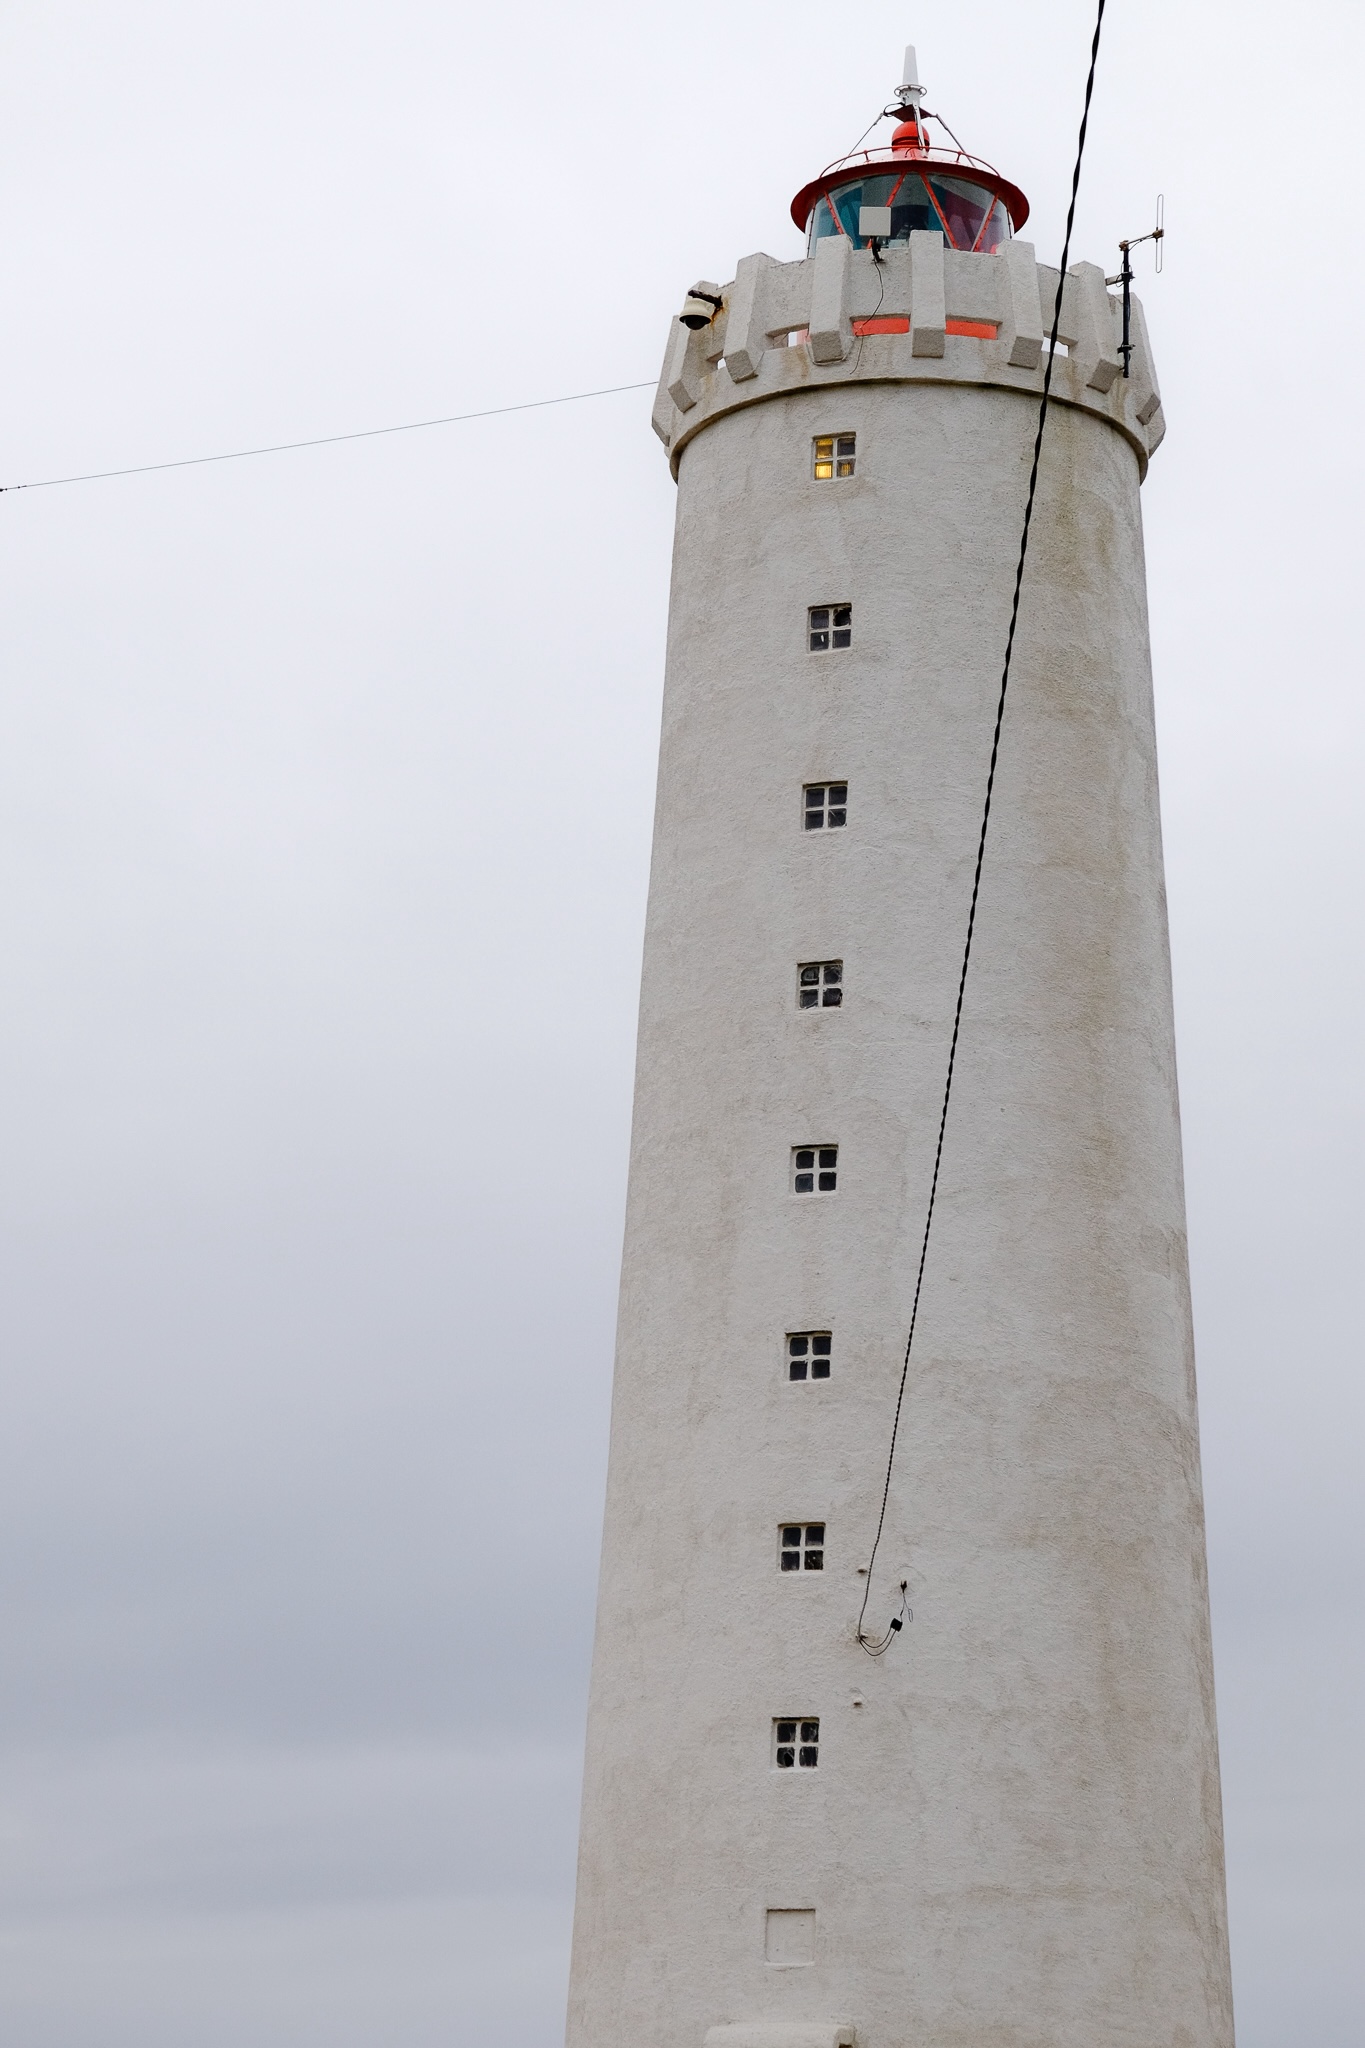 A weathered white lighthouse with red housing for the massive bulb with cables extending from two parts of the structure